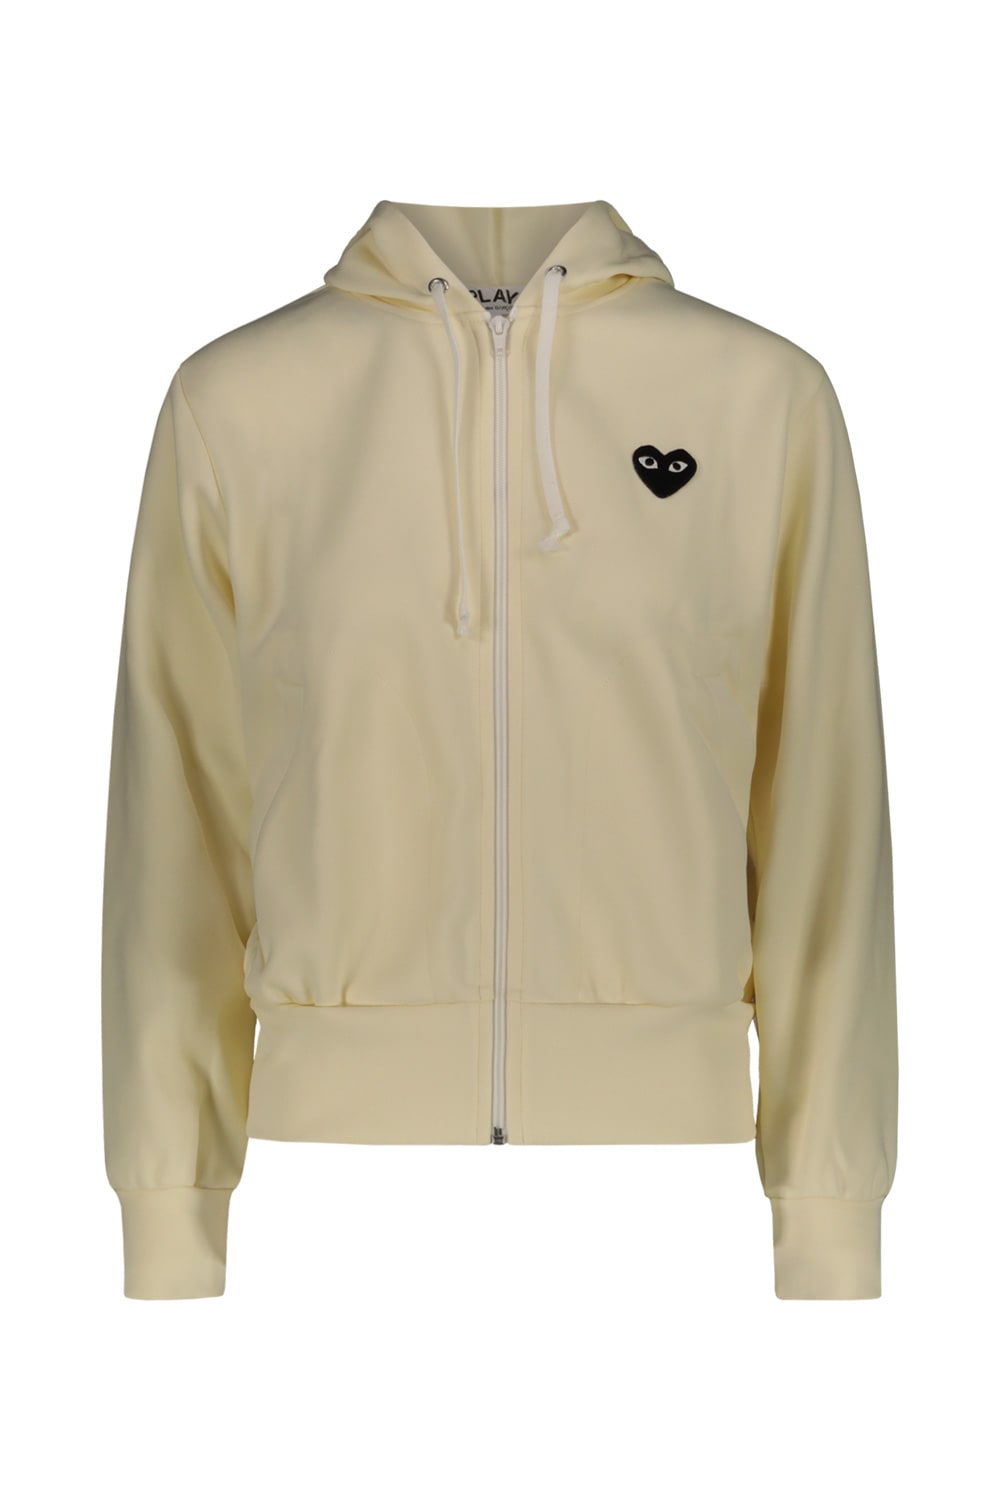 Comme Des Garçons Play Play Comme Des Garçons Hooded Sweetshirt In Ivory